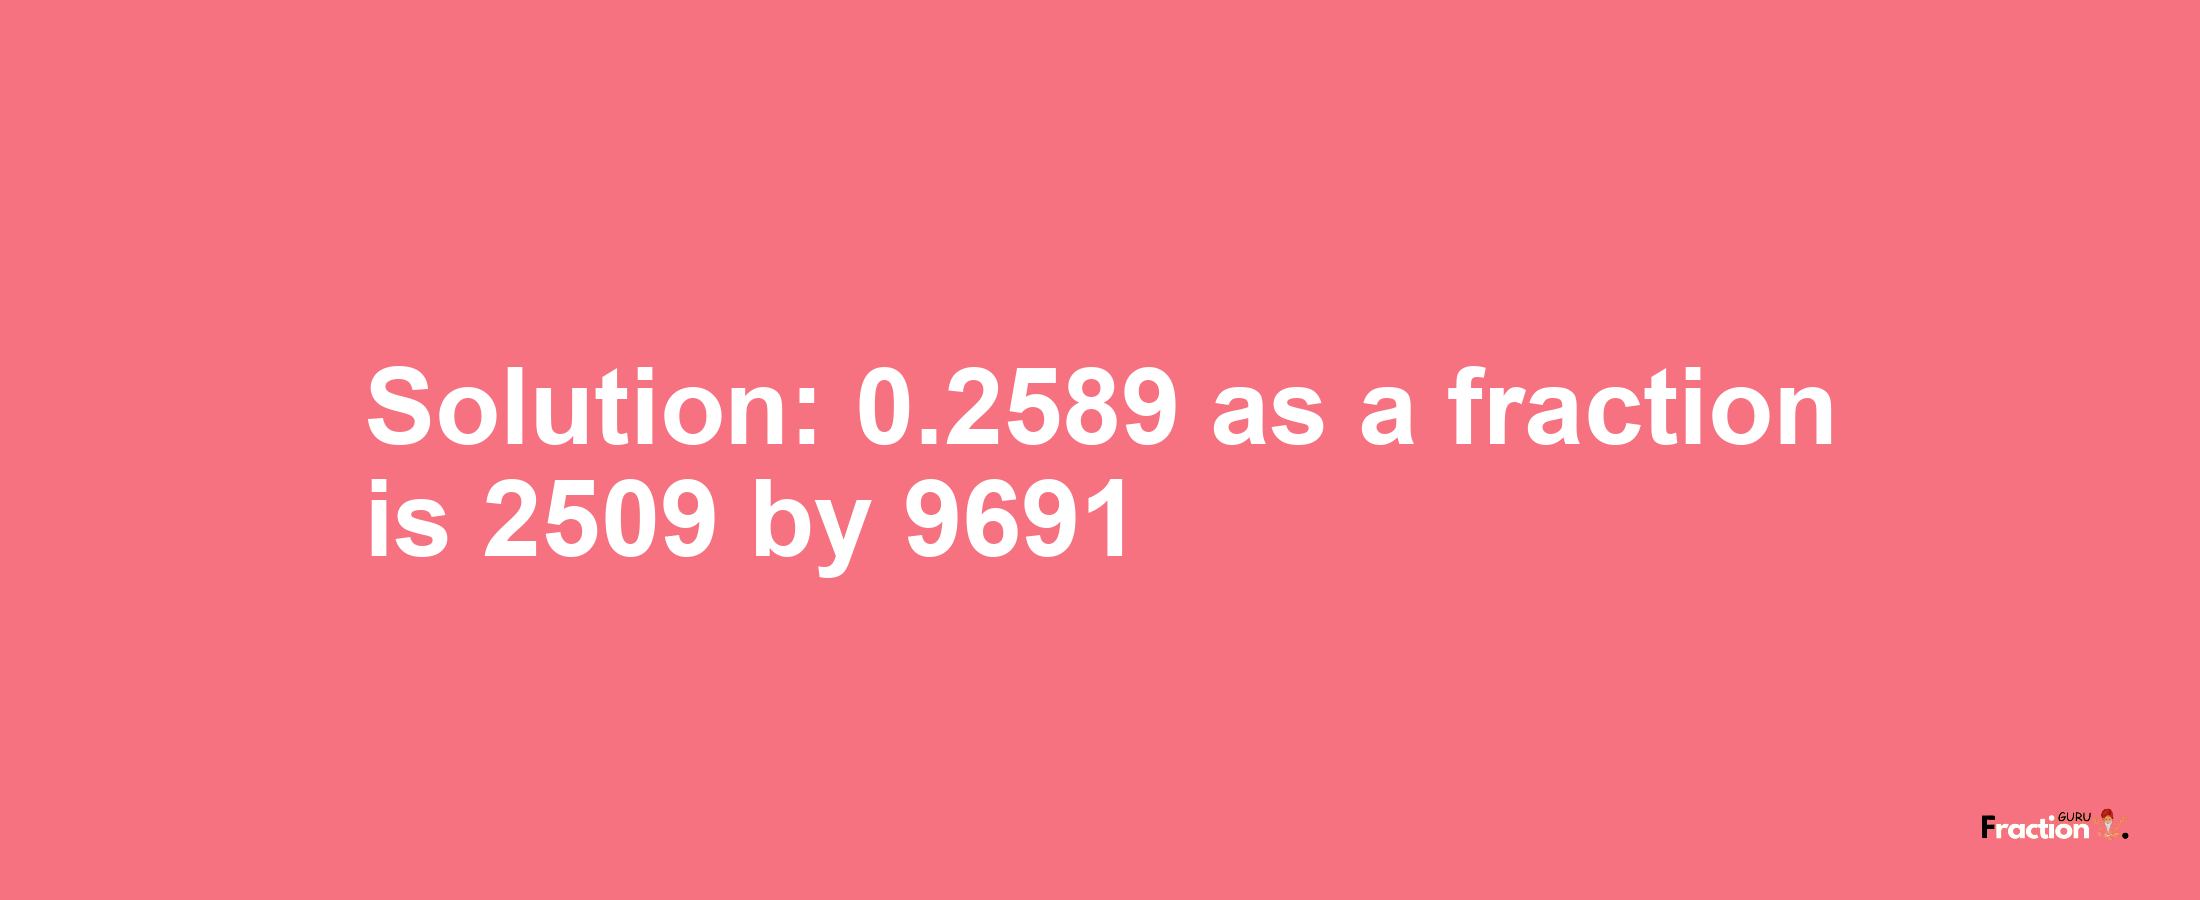 Solution:0.2589 as a fraction is 2509/9691